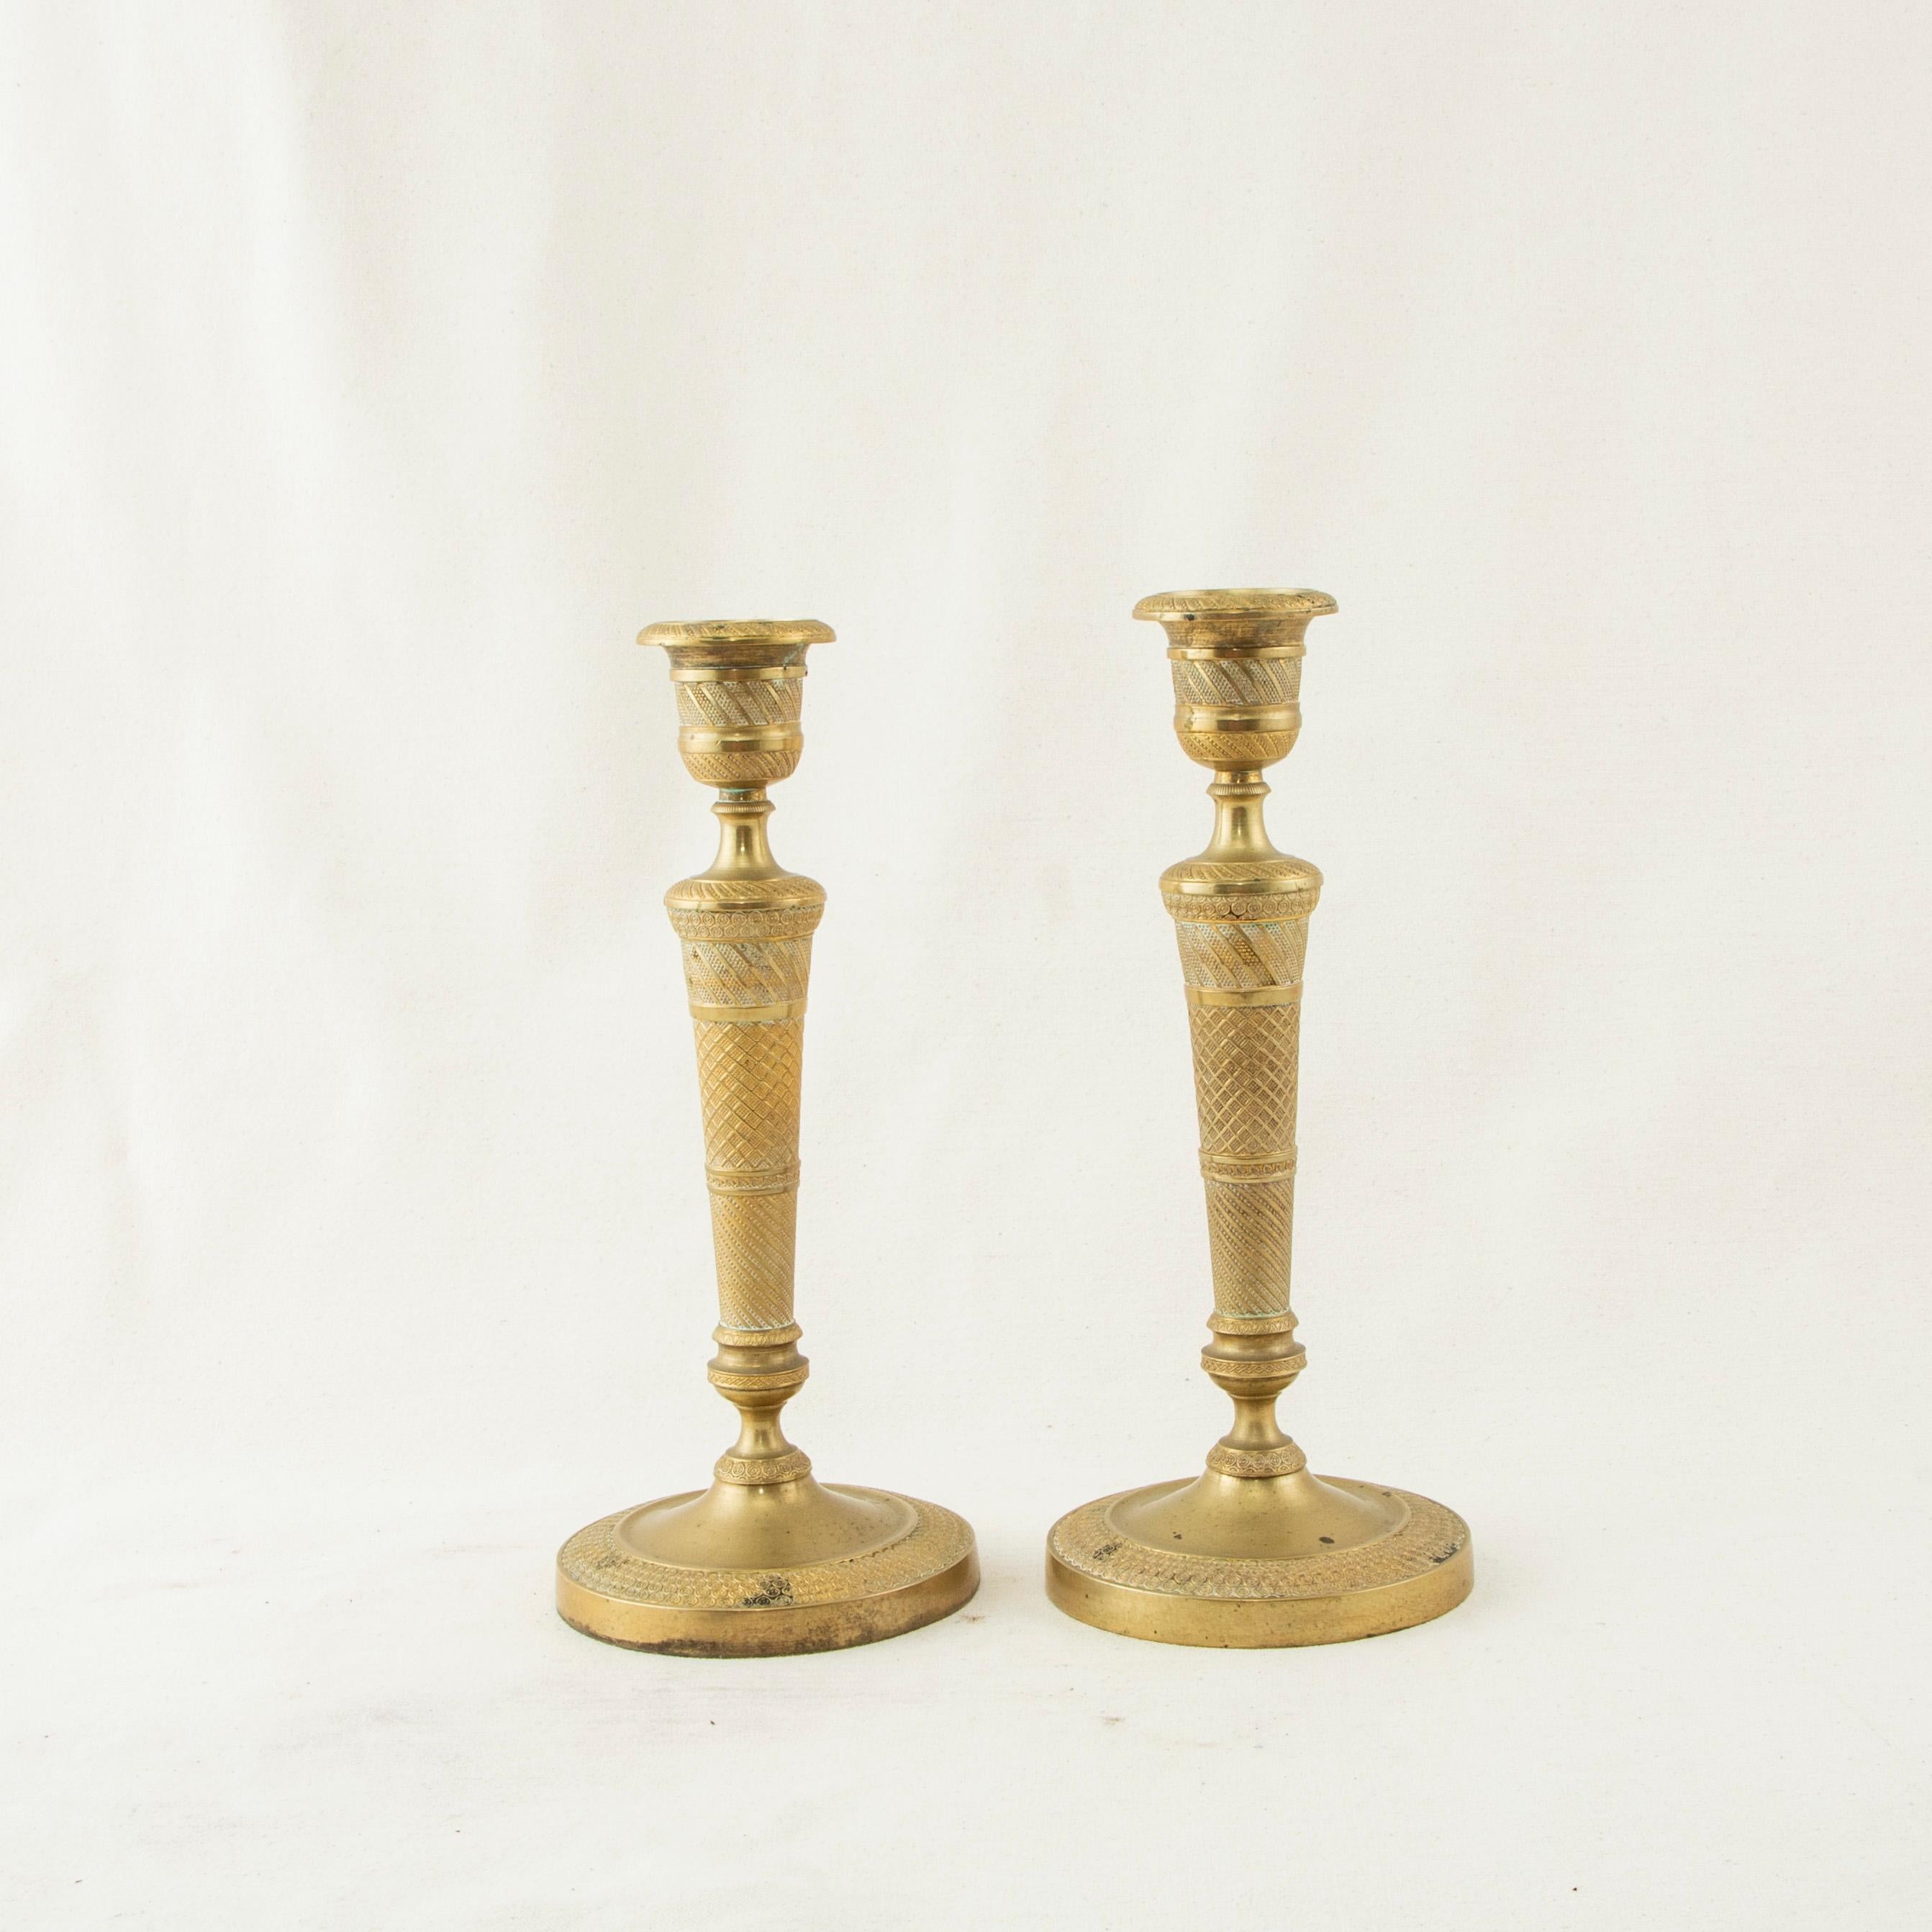 Pair of Early 19th Century French Restauration Period Bronze Candlesticks 1